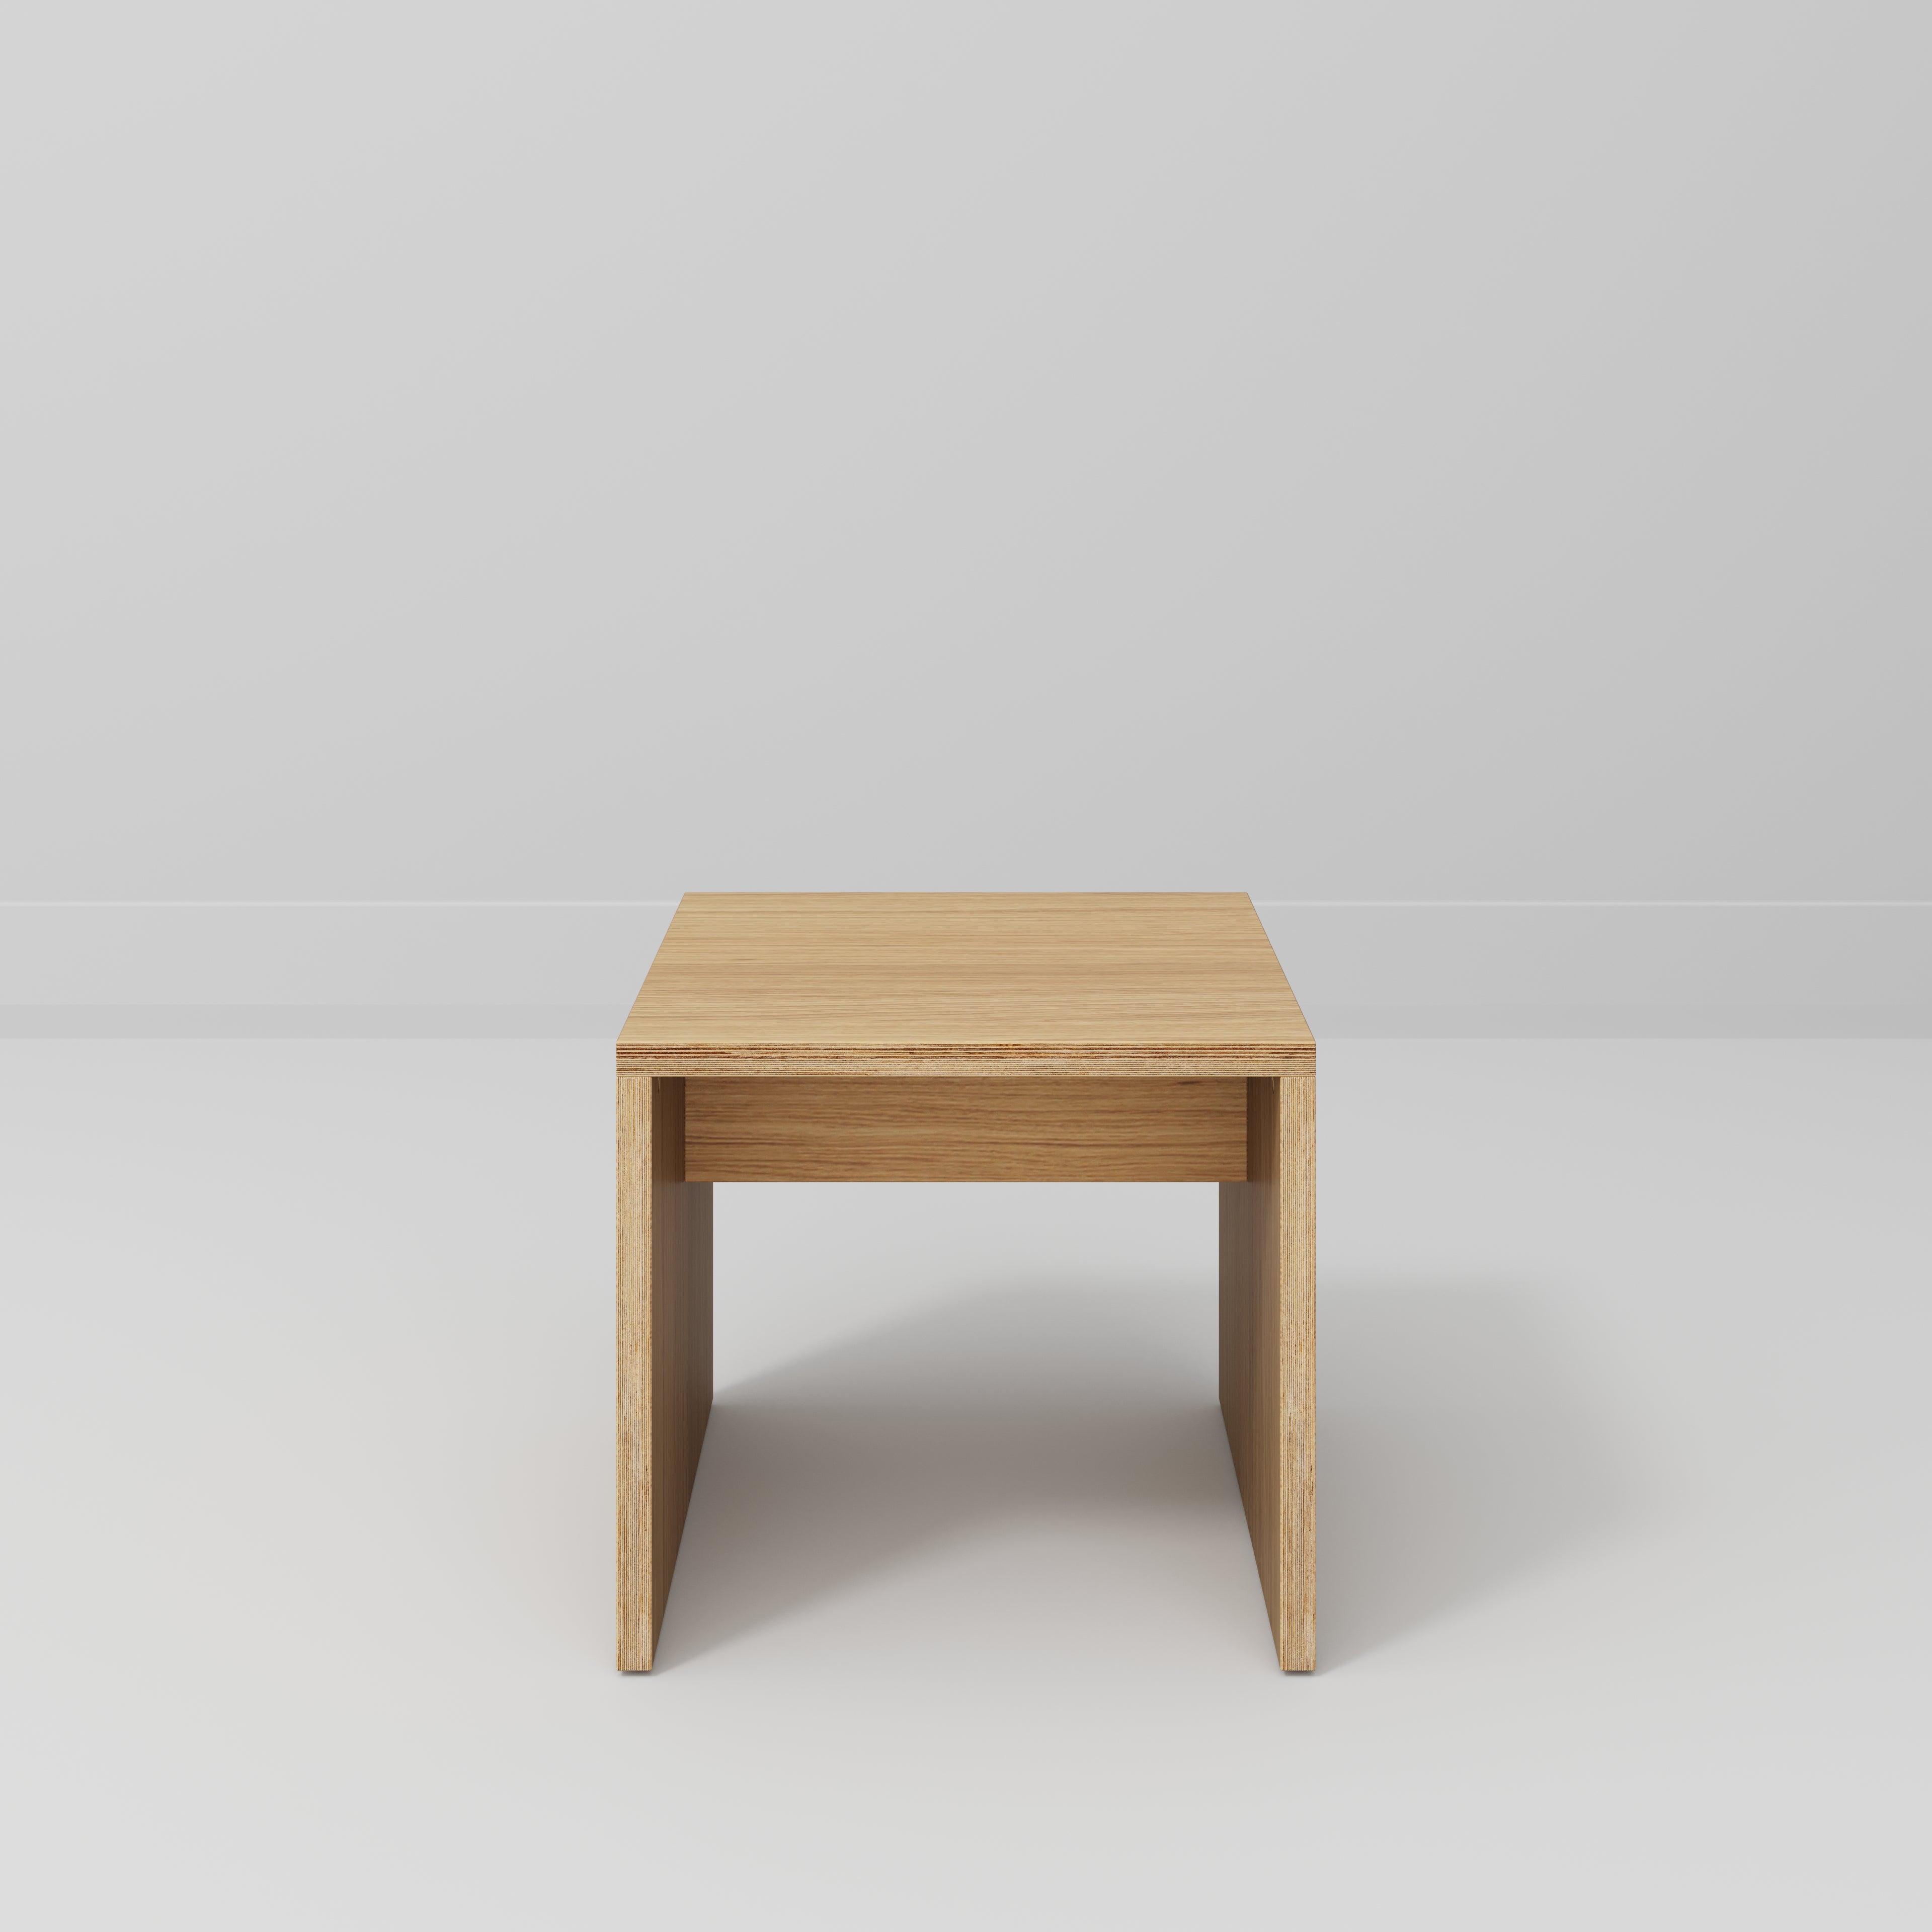 Side Table with Solid Sides - Plywood Oak - 500(w) x 500(d) x 450(h)